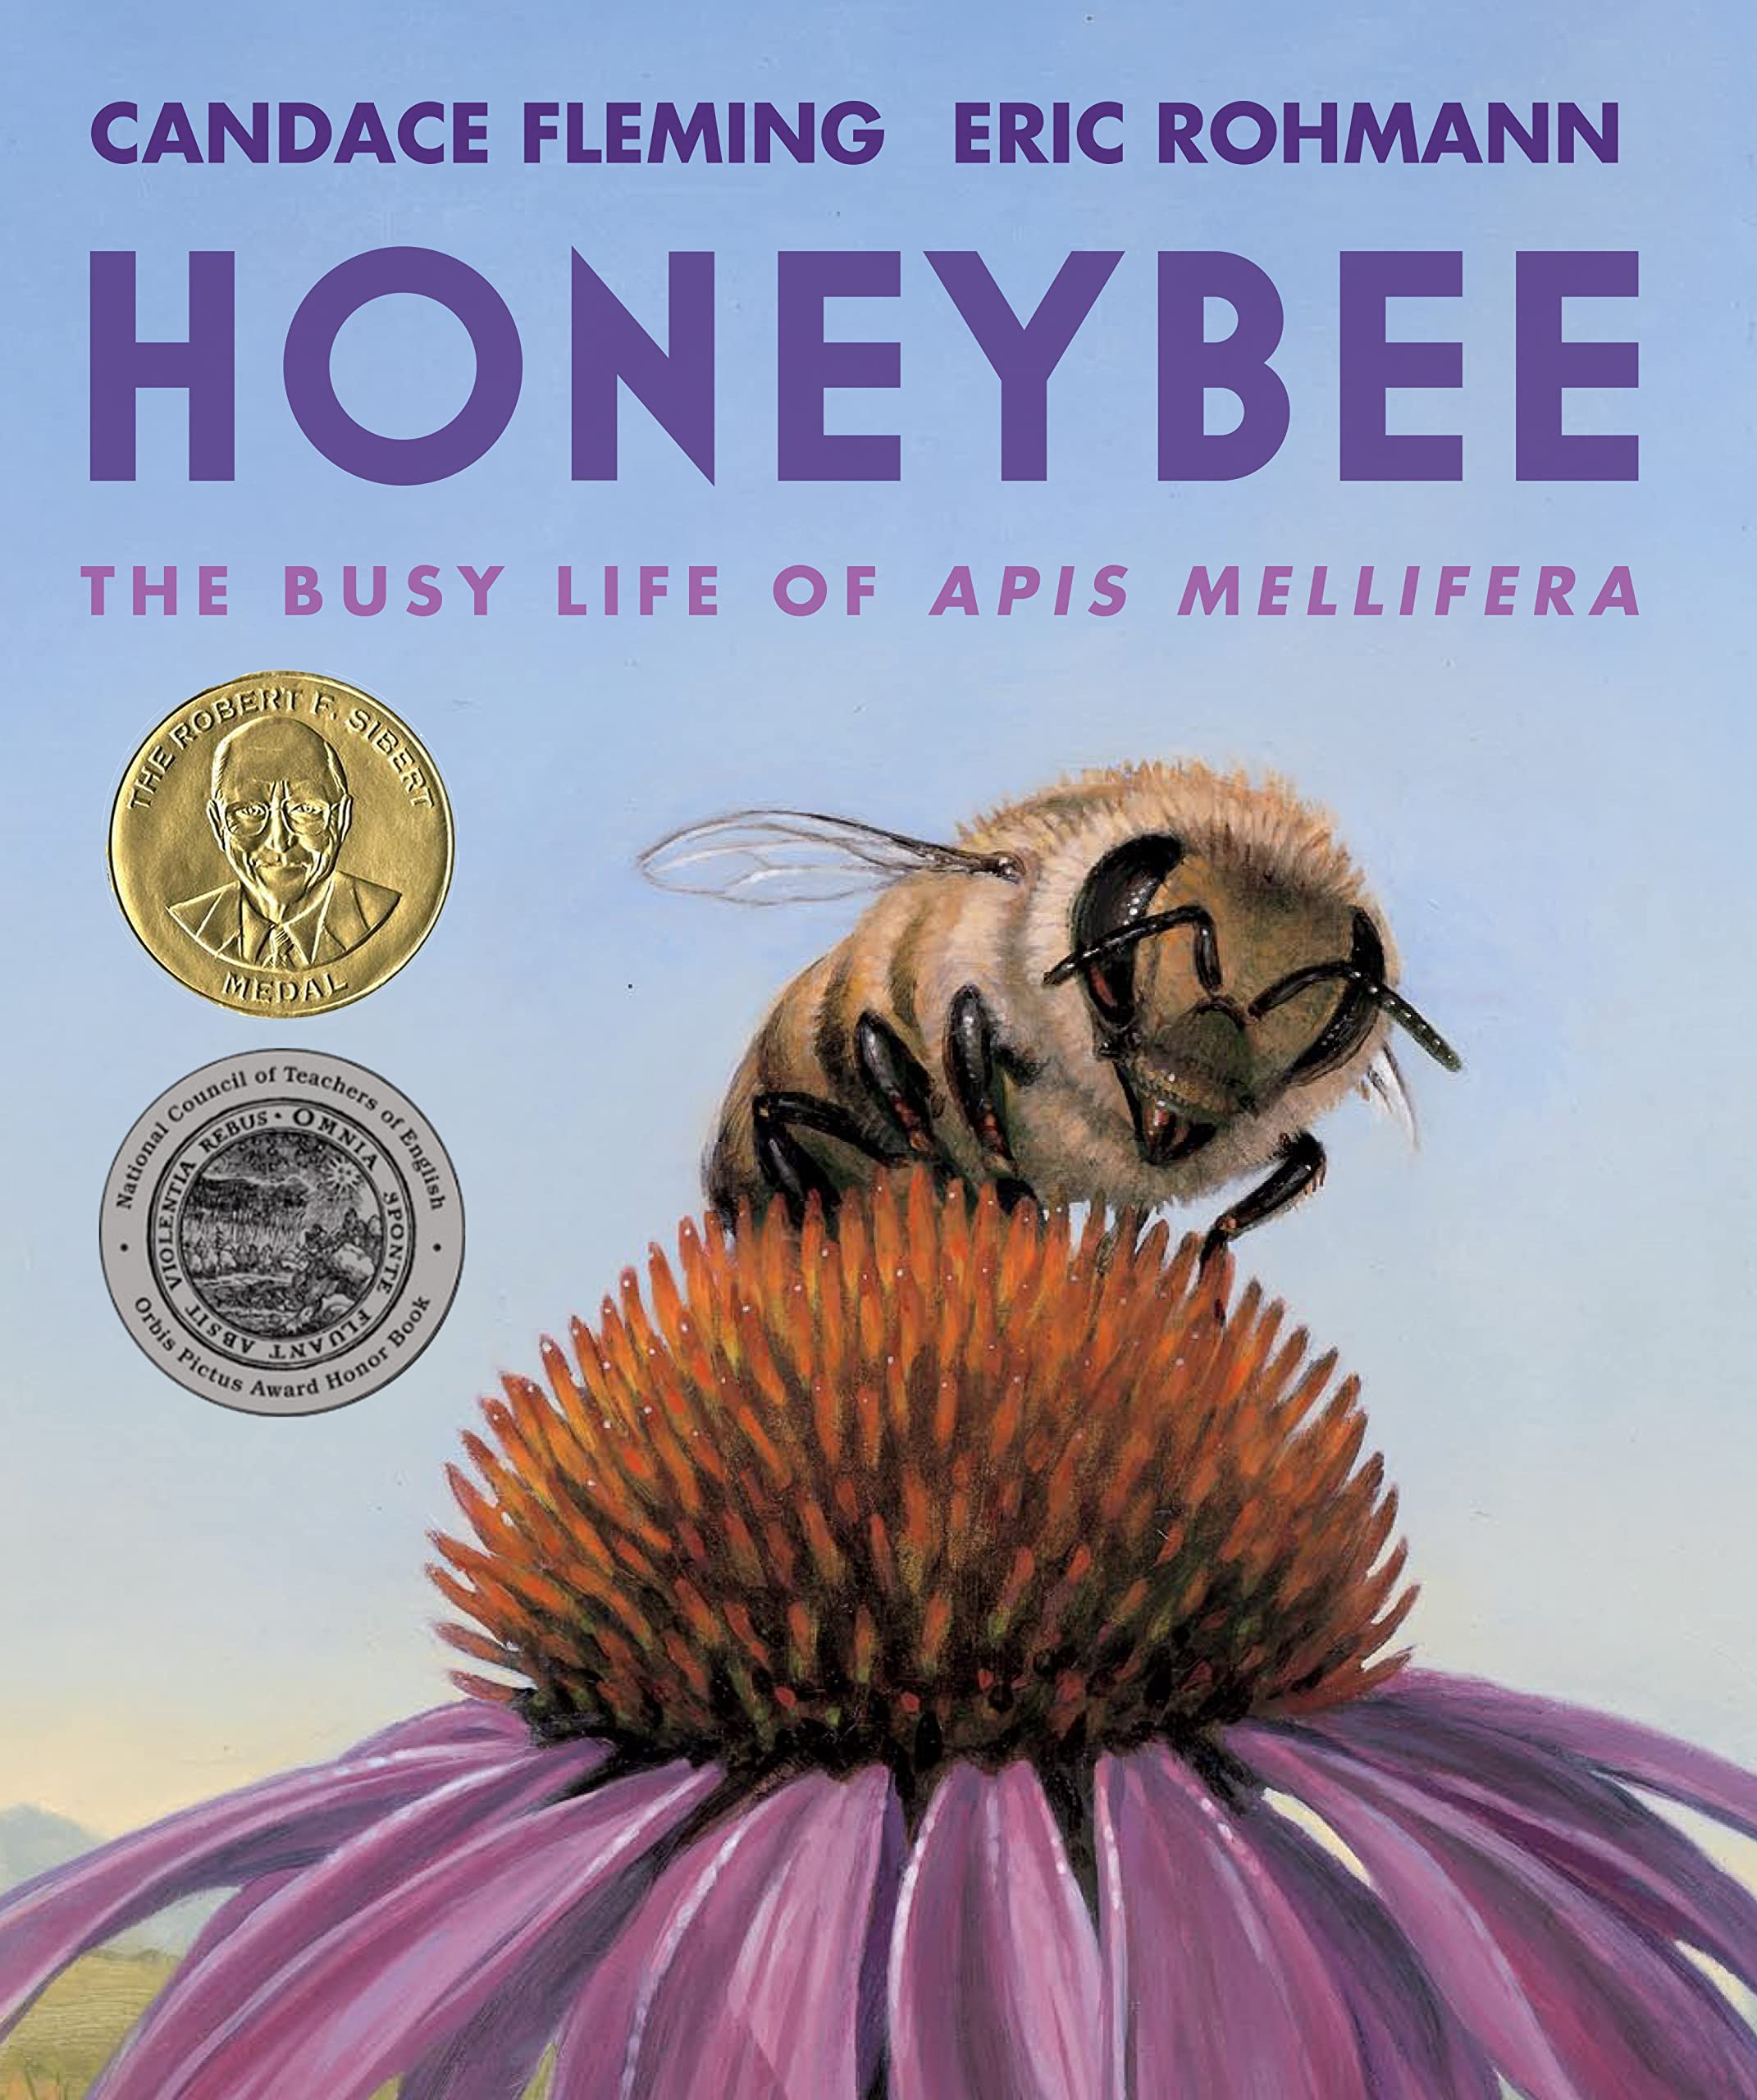 Honeybee: The Busy Life 		of Apis Mellifera By Candace Fleming Illustrated by Eric Rohmann ISBN: 978-0-8234-4285-0 Neal Porter Books 40 pages Grades 3 Synopsis Vivid images and descriptive language chronicle the life cycle of a bee. The story shares information about jobs that bees have in the hive, then describes how “Apis” finds flower pollen and nectar, communicates it to others in her hive, and uses it to help the colony survive.